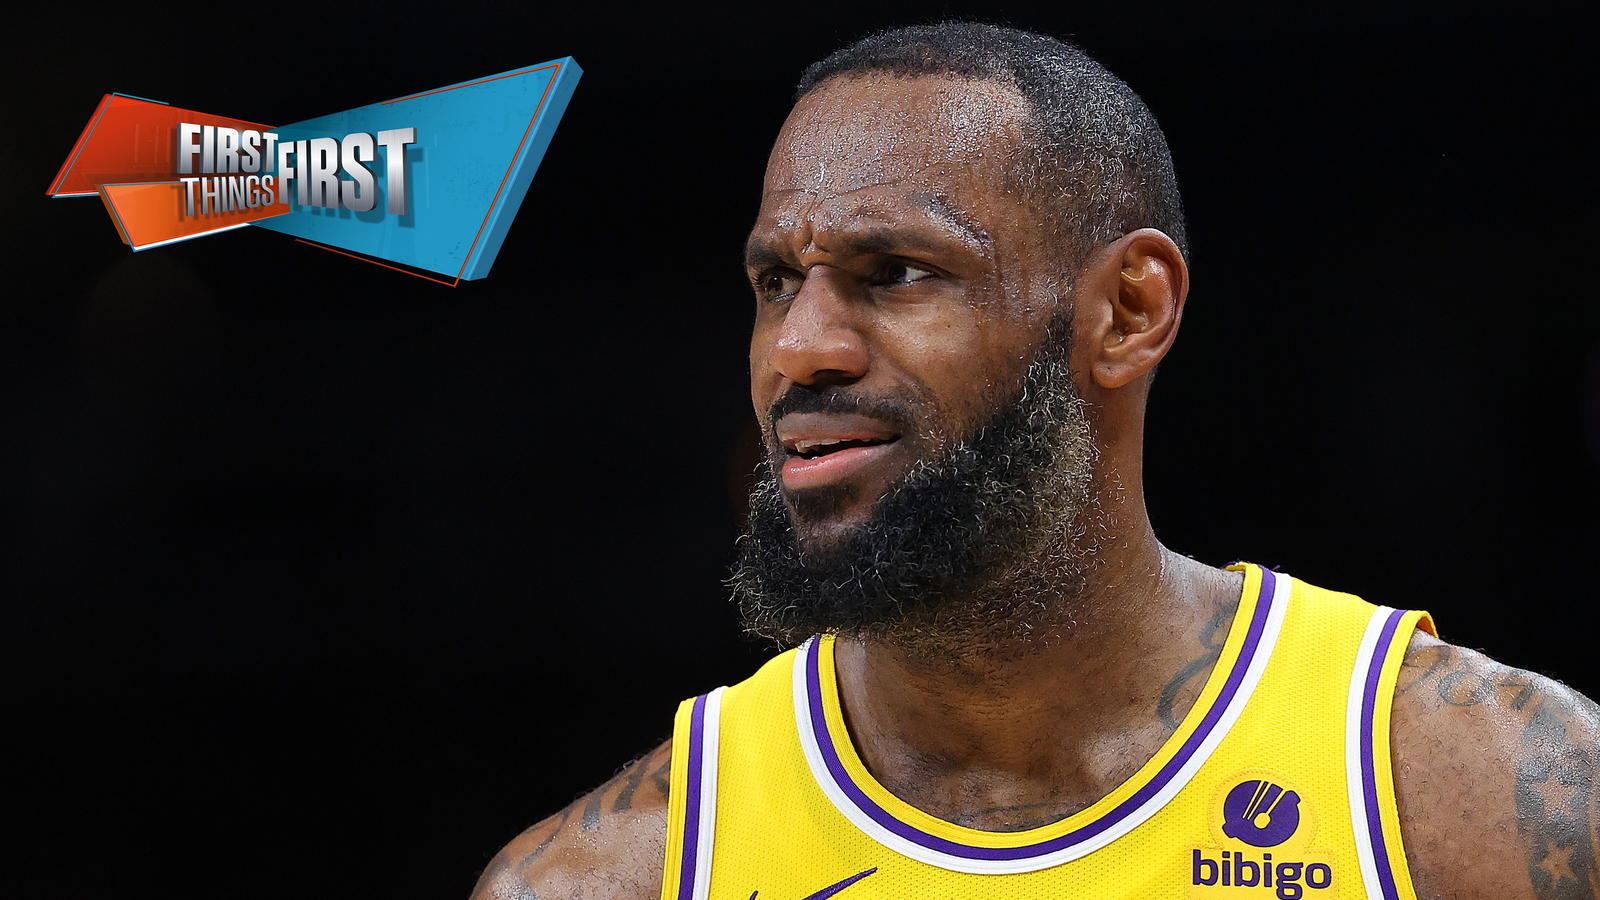 Should LeBron ask the Lakers for a trade? 